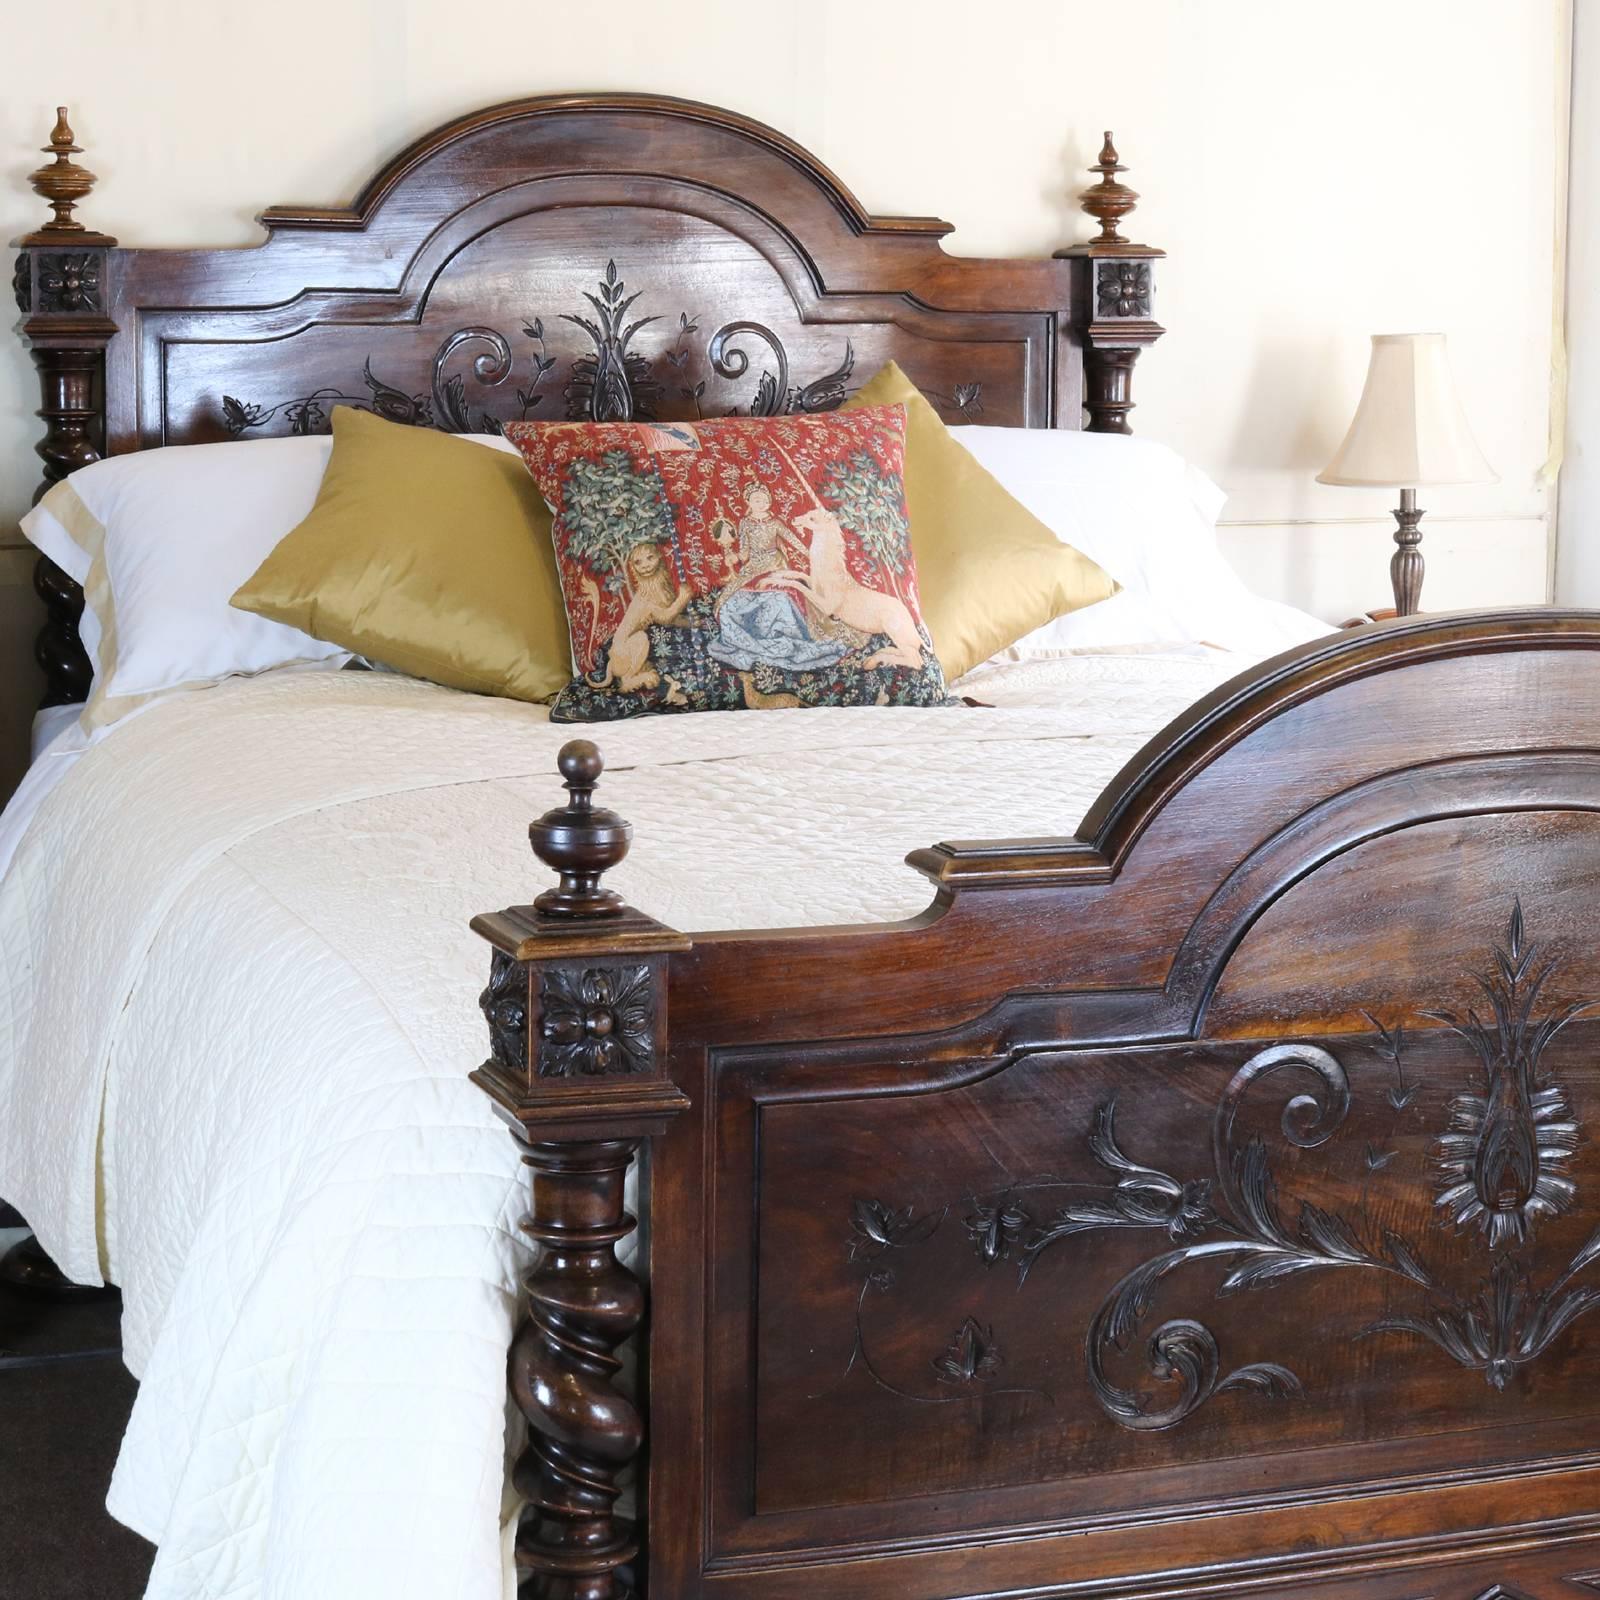 A fine example of a French Chateau bed in walnut.

This bed accepts a 5ft wide (60 in) British king-size or American Queen size base and mattress.

The price is for the bed alone, the base, mattress, bedding and linen are extra and can be